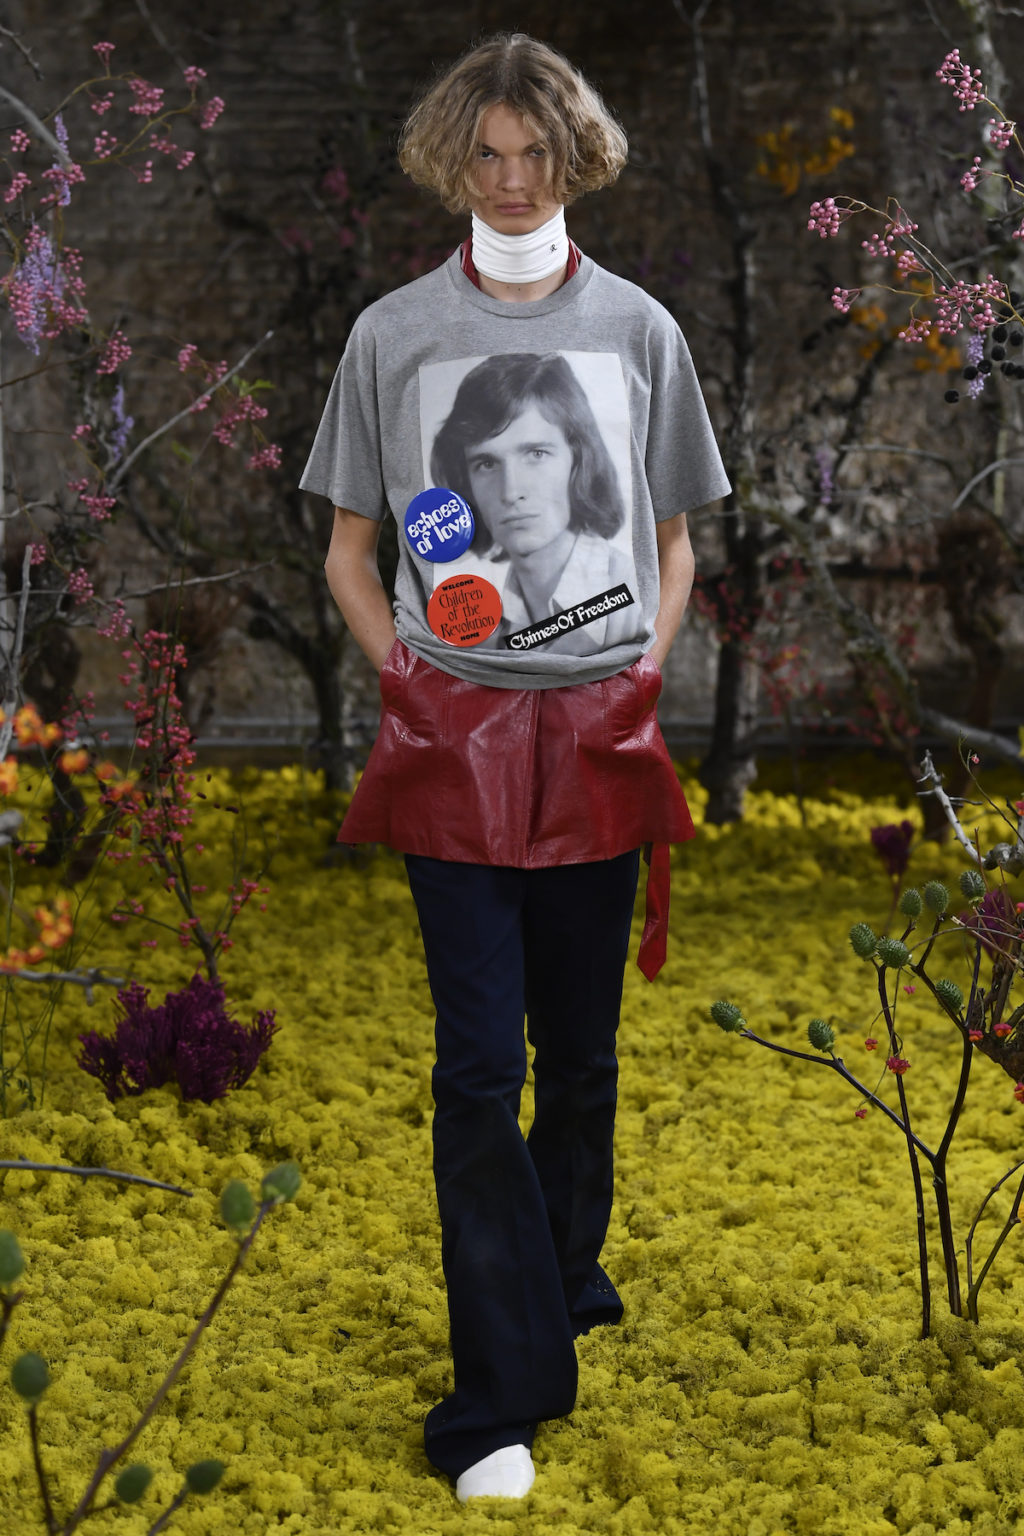 Raf Simons Spring/Summer 2021 Collection – PAUSE Online | Men's Fashion ...